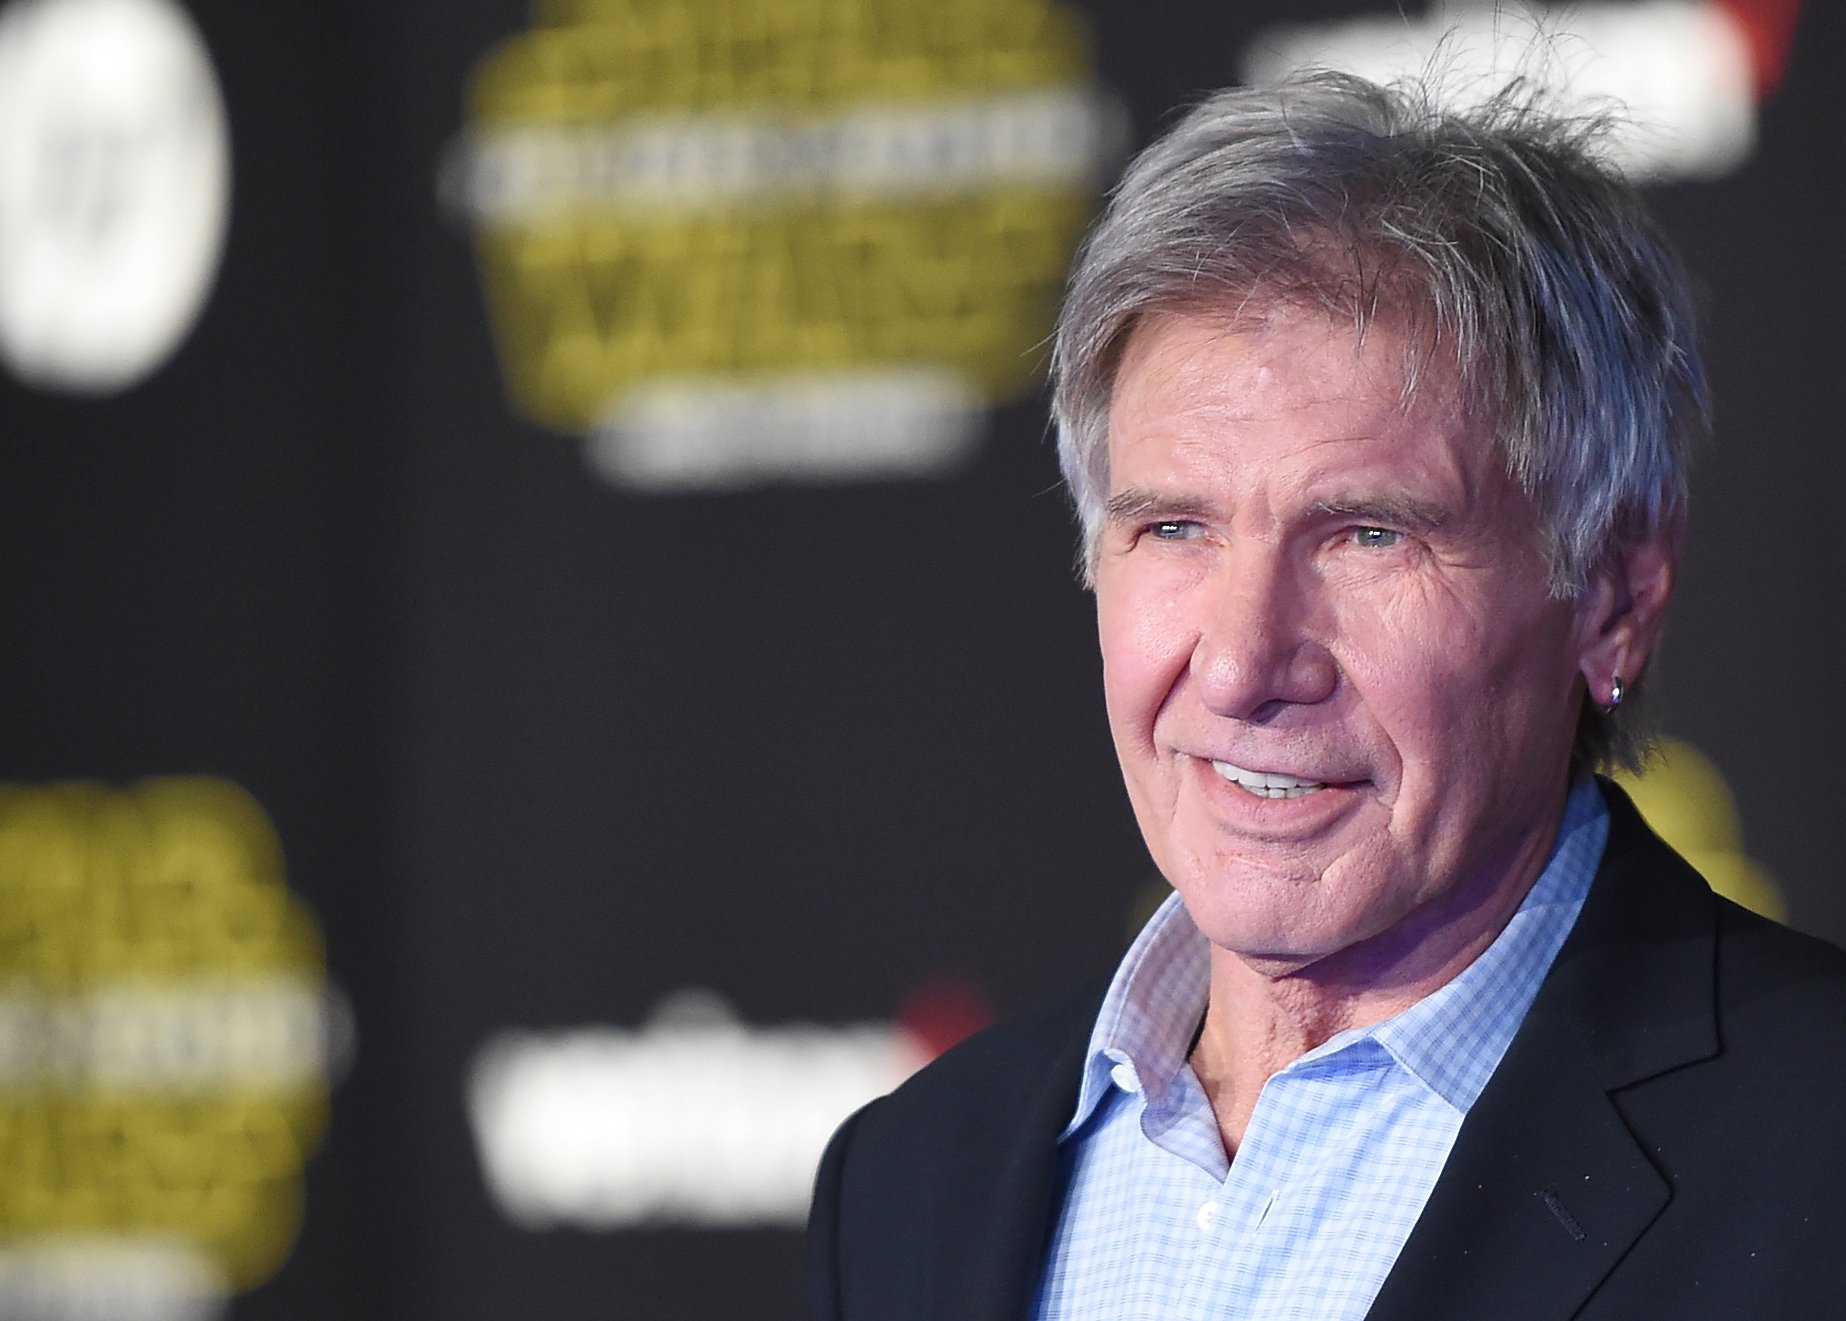 Harrison Ford attends the movie premiere of Star Wars: Episode VII: The Force Awakens